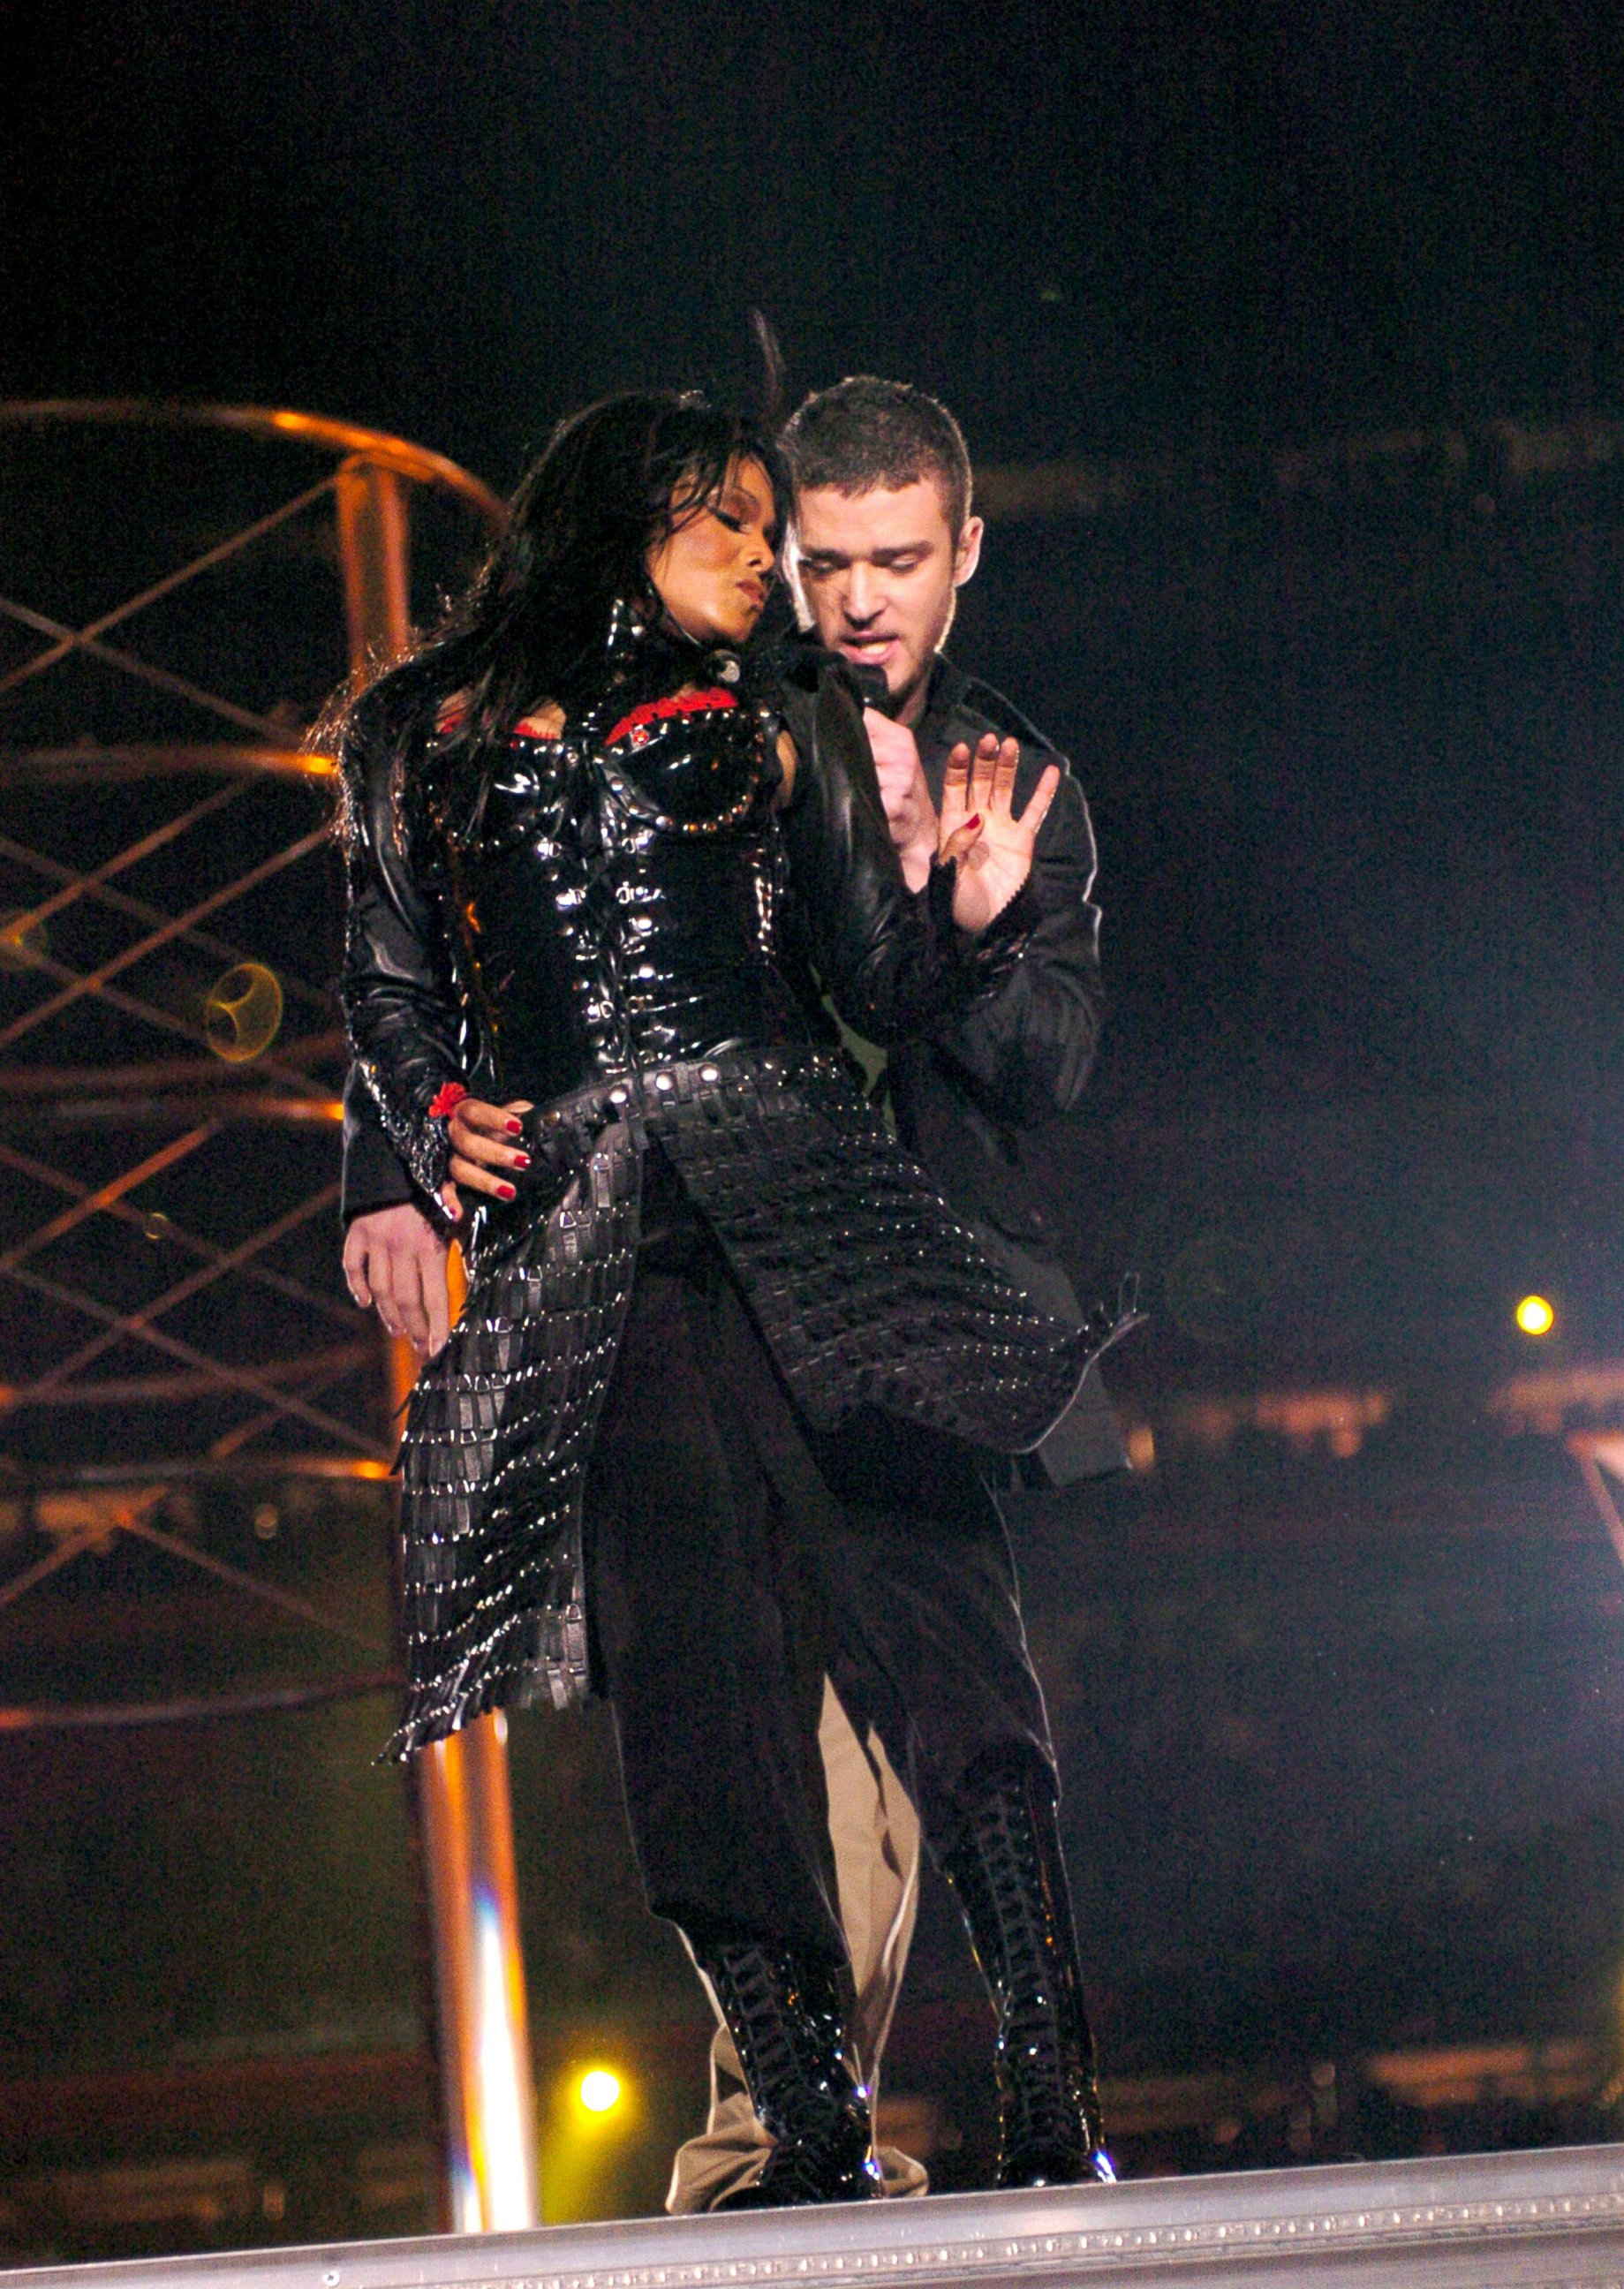 PHOTO: Janet Jackson and Justin Timberlake perform during The AOL TopSpeed Super Bowl XXXVIII Halftime Show, Feb. 1, 2004, in Houston.